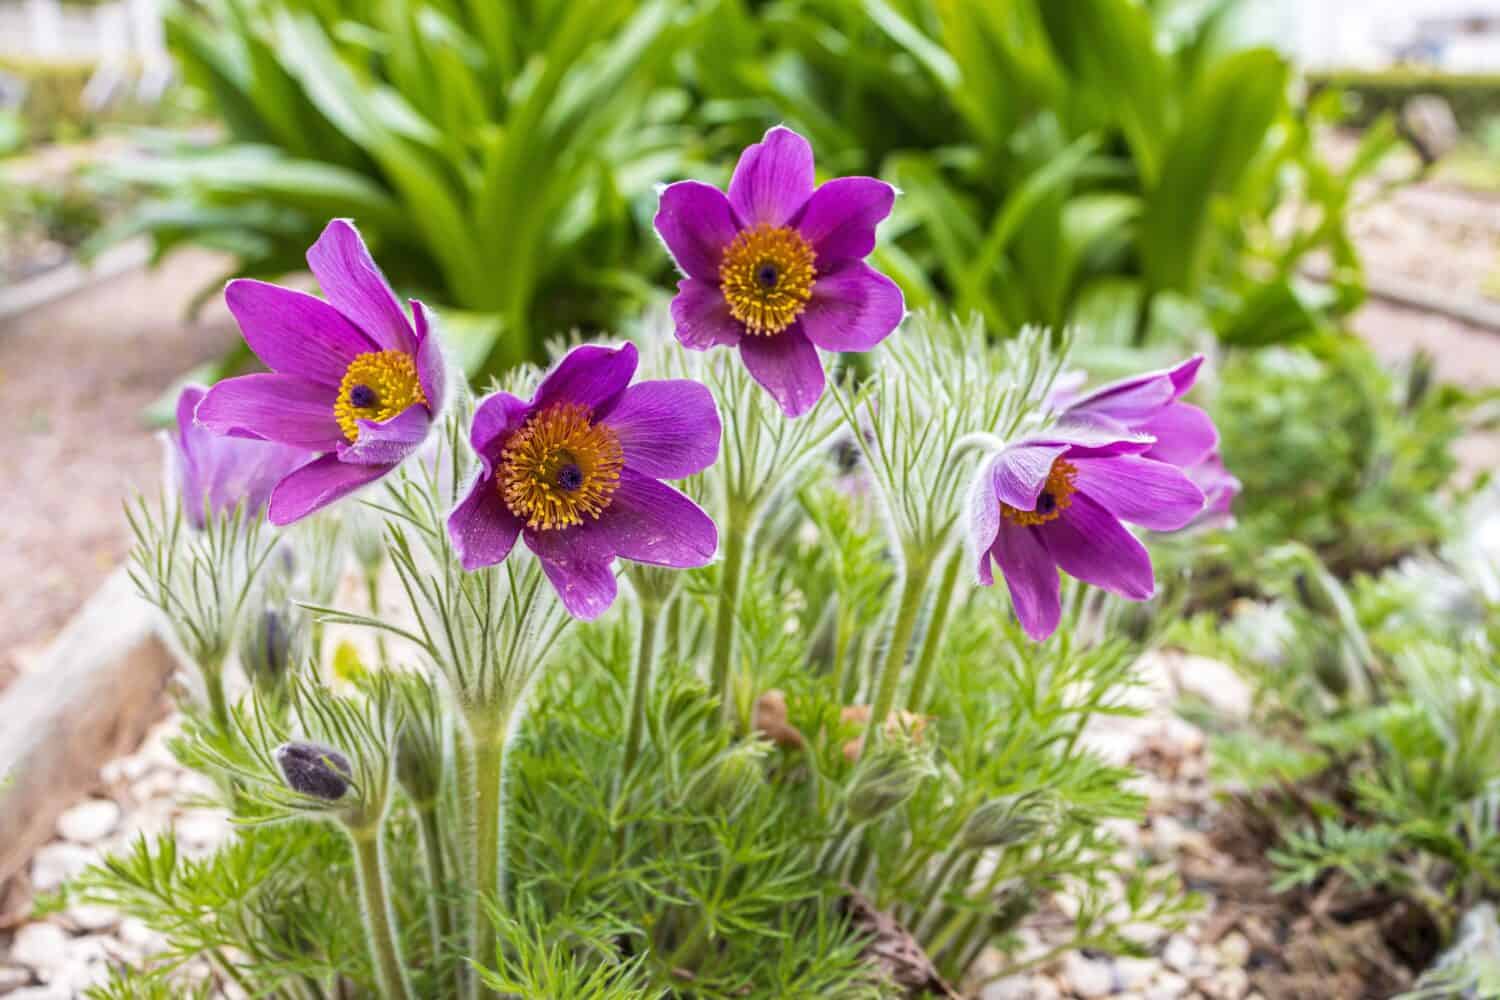 Pulsatilla patens is a species of flowering plant in the family Ranunculaceae, native to Europe, Russia, Mongolia, and China. Common names include Eastern pasqueflower and cutleaf anemone.